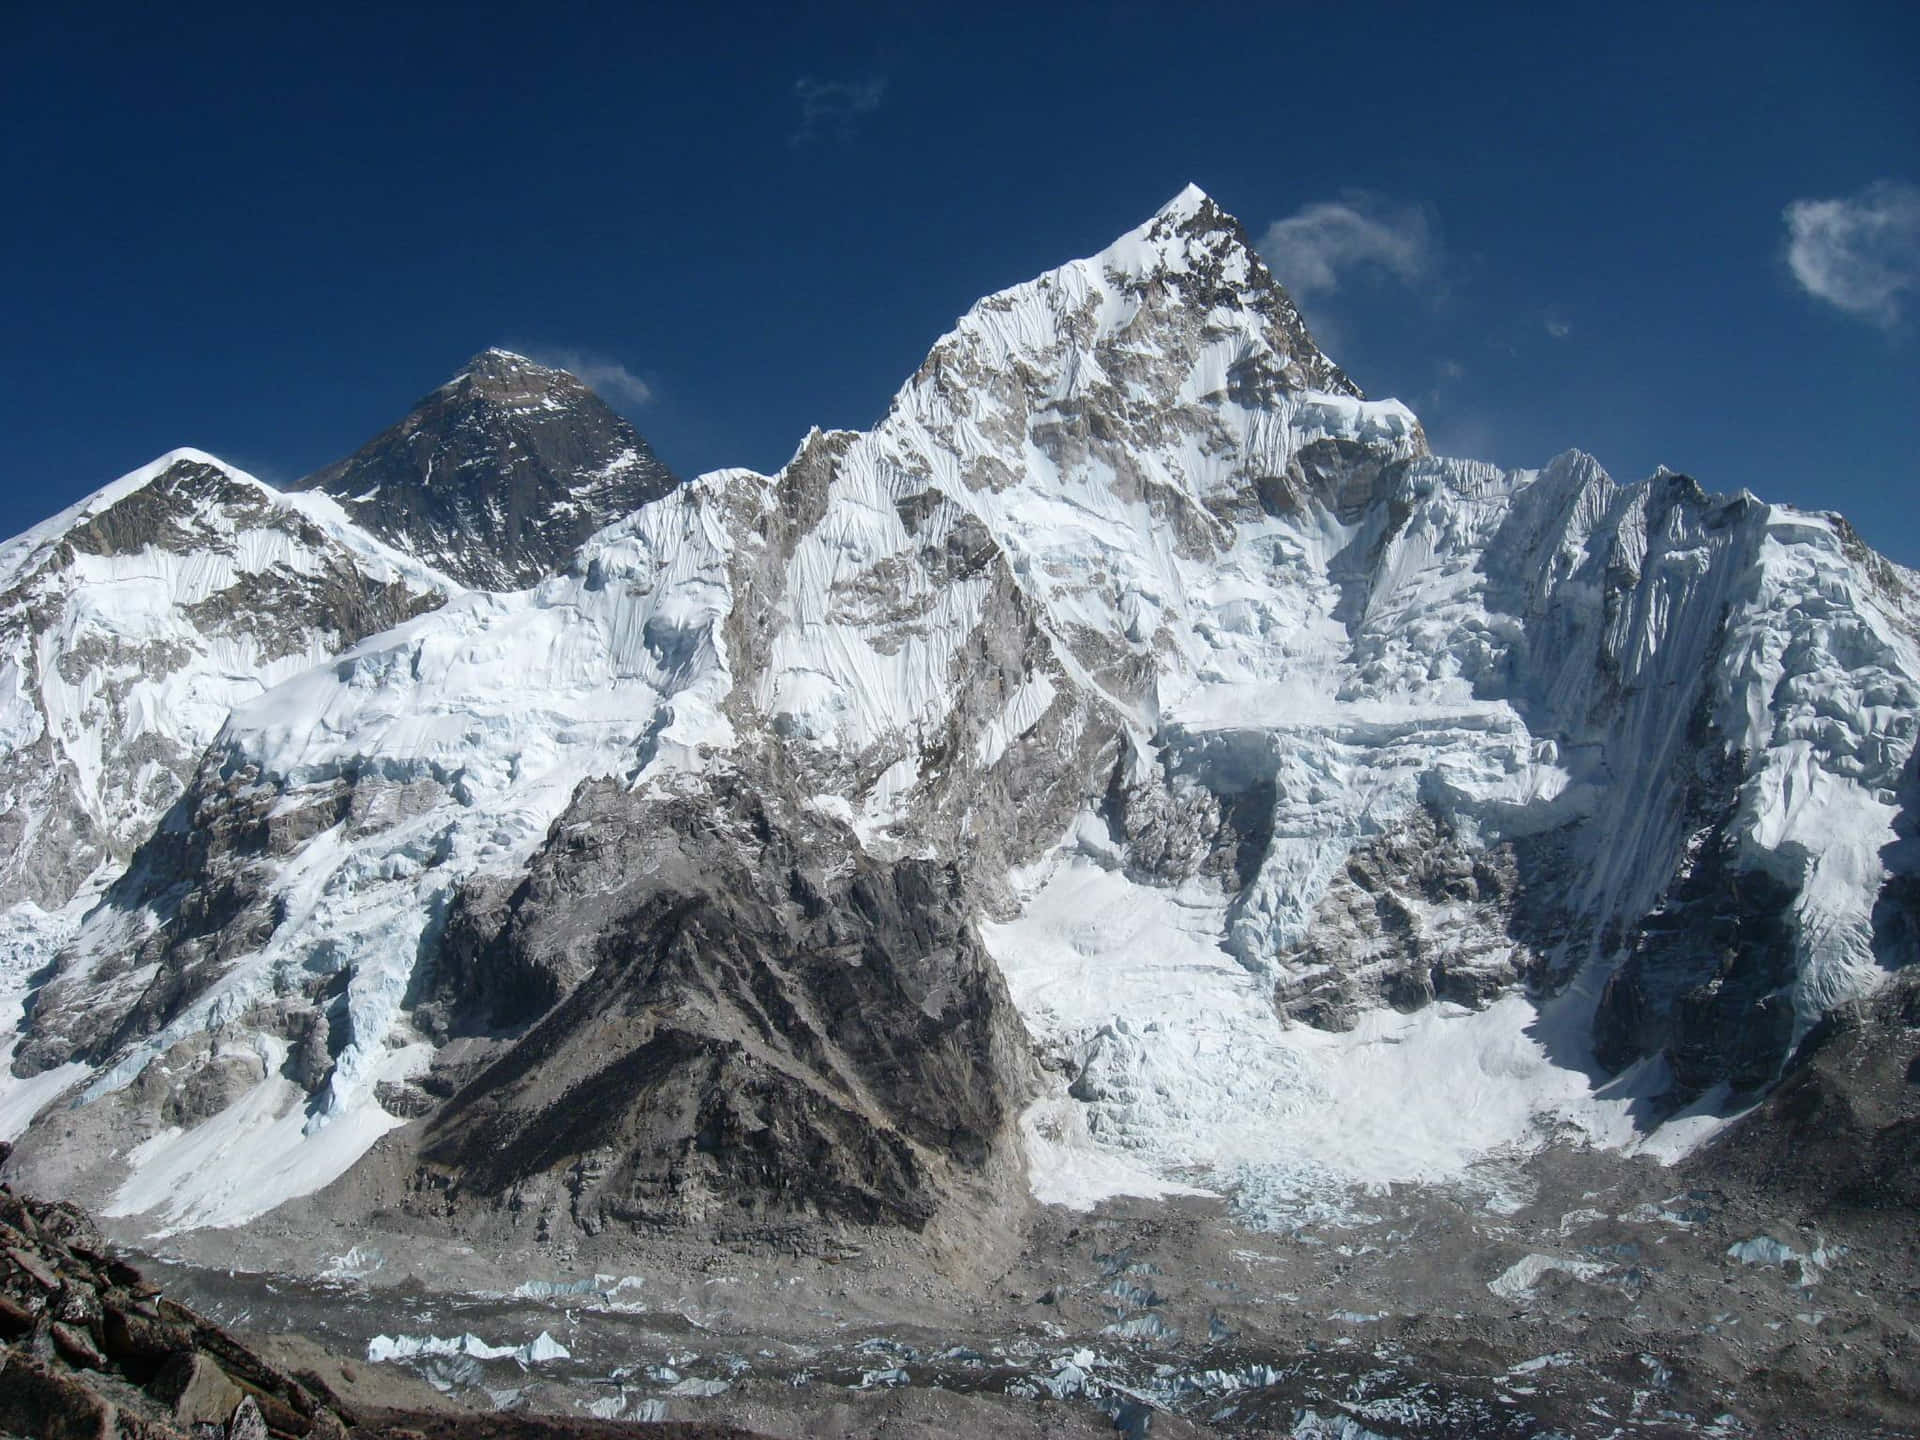 View of the majestic Mount Everest, the tallest mountain in the world.